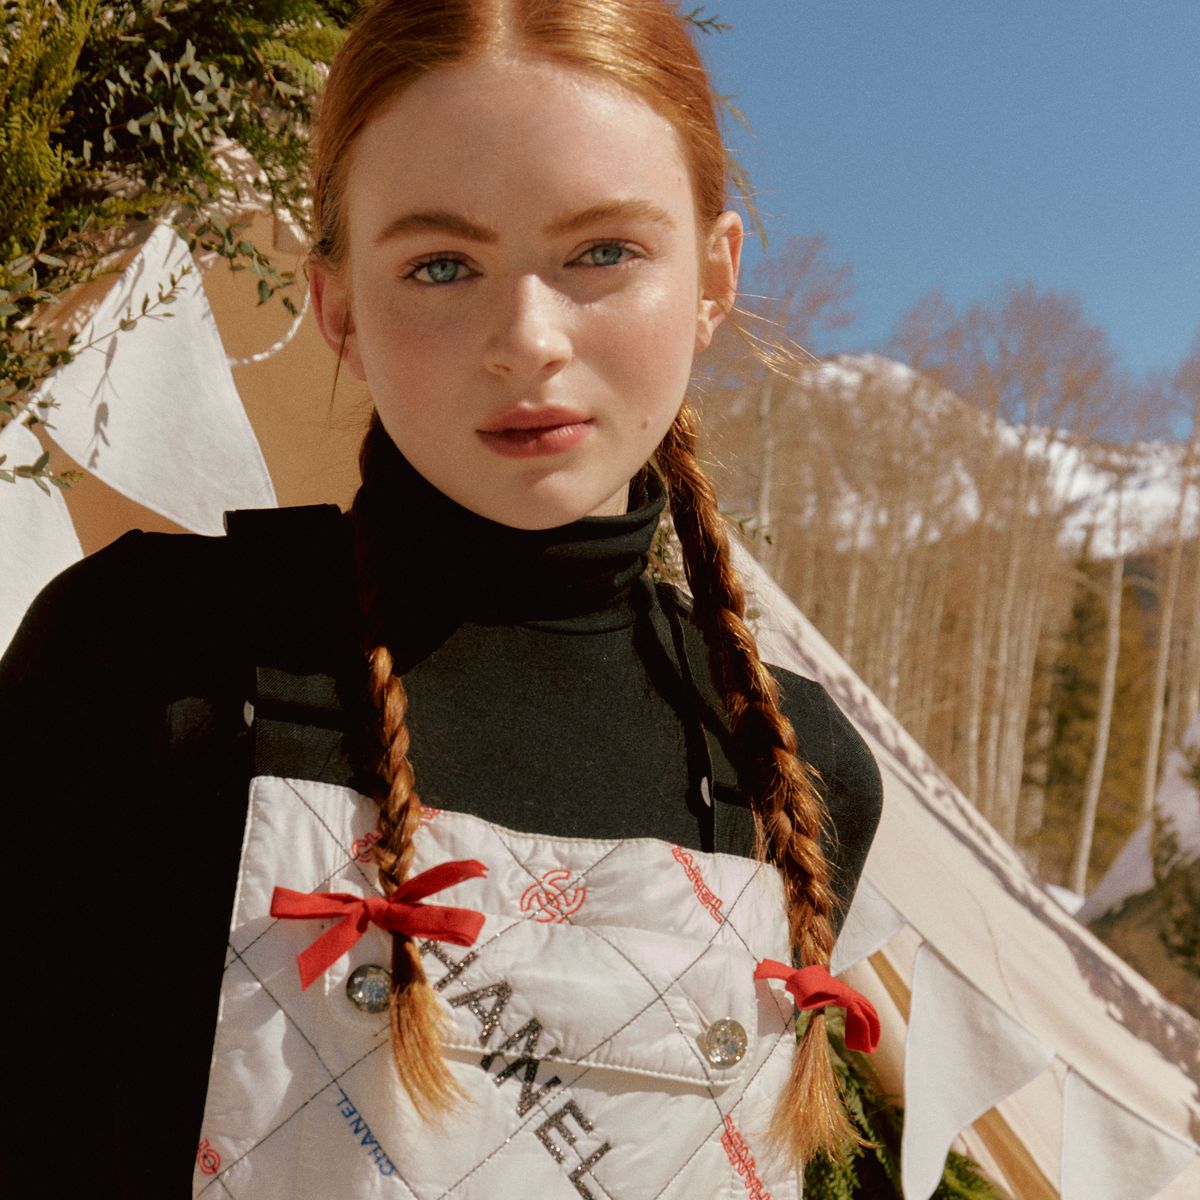 Sadie Sink Goes to Aspen With Chanel